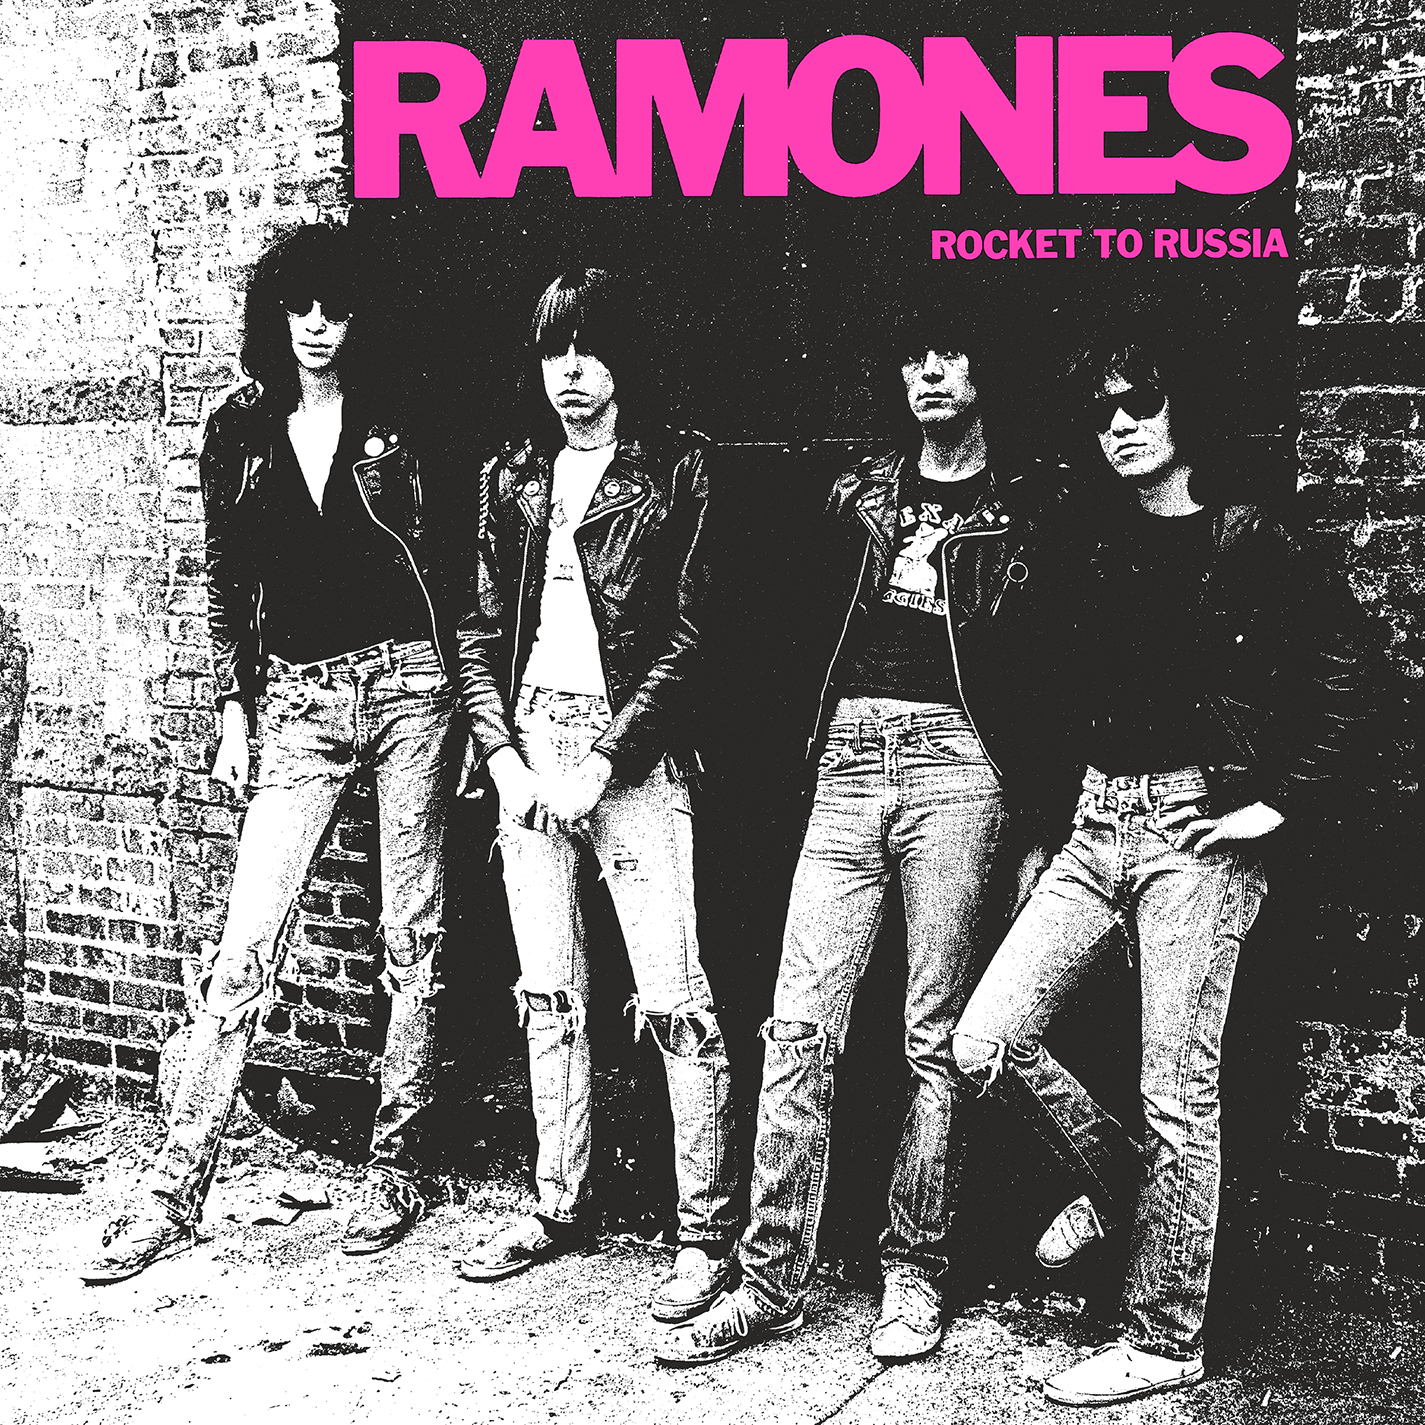 Rocket To Russia (40th Anniversary Deluxe Edition) (3cd Set) (Vinyl)